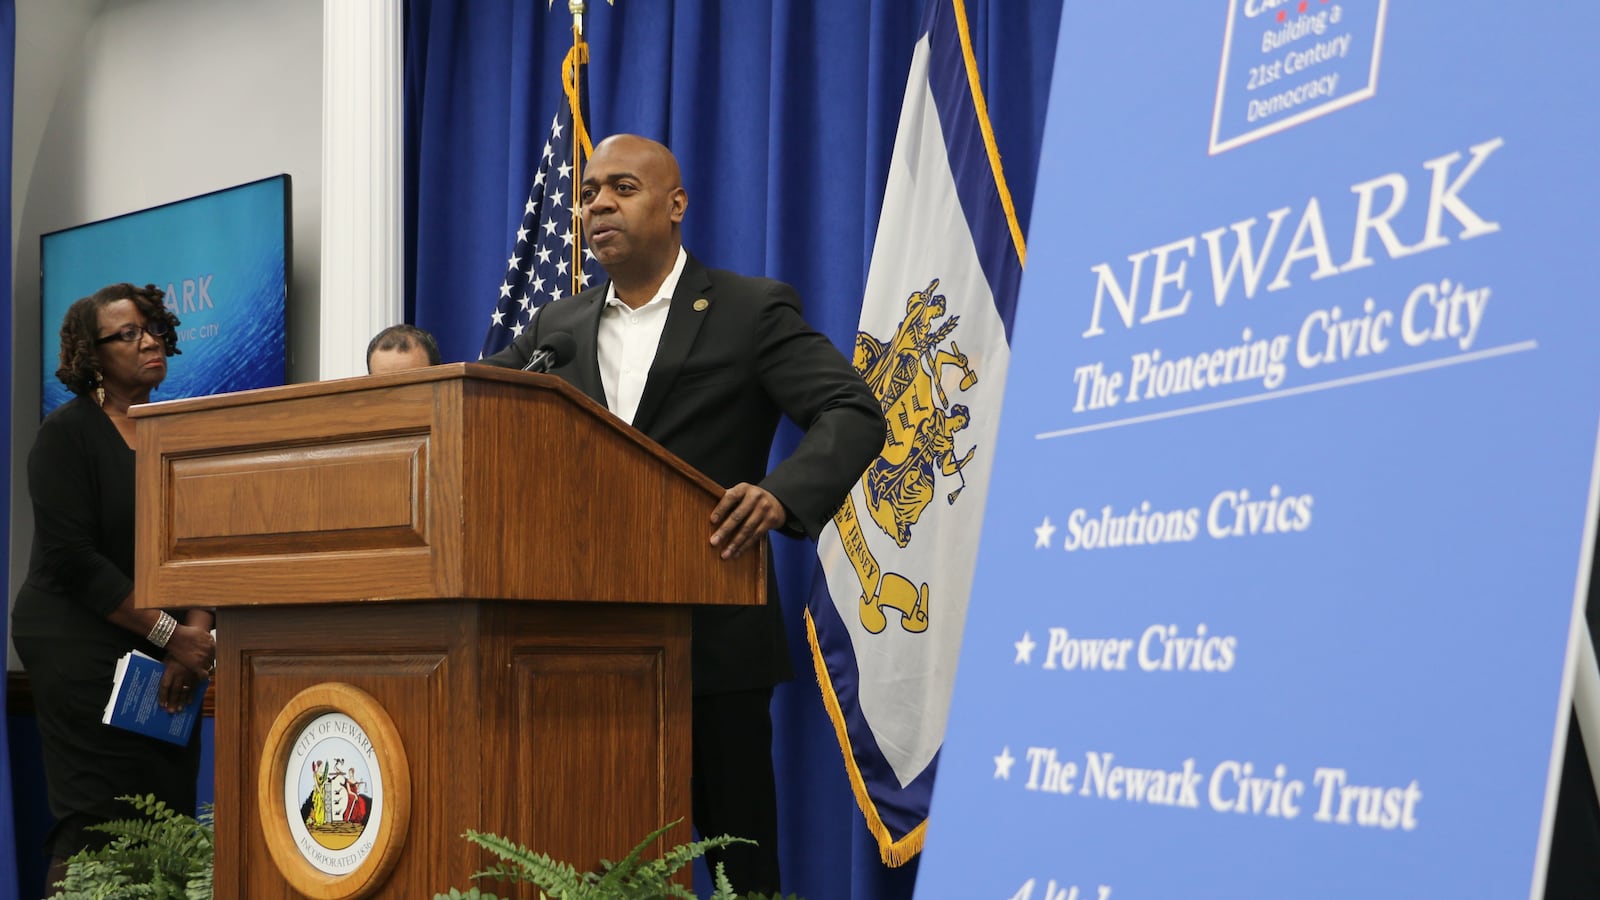 Newark Mayor Ras Baraka announced a new "civic city" campaign Wednesday that includes a problem-solving course for high schoolers.